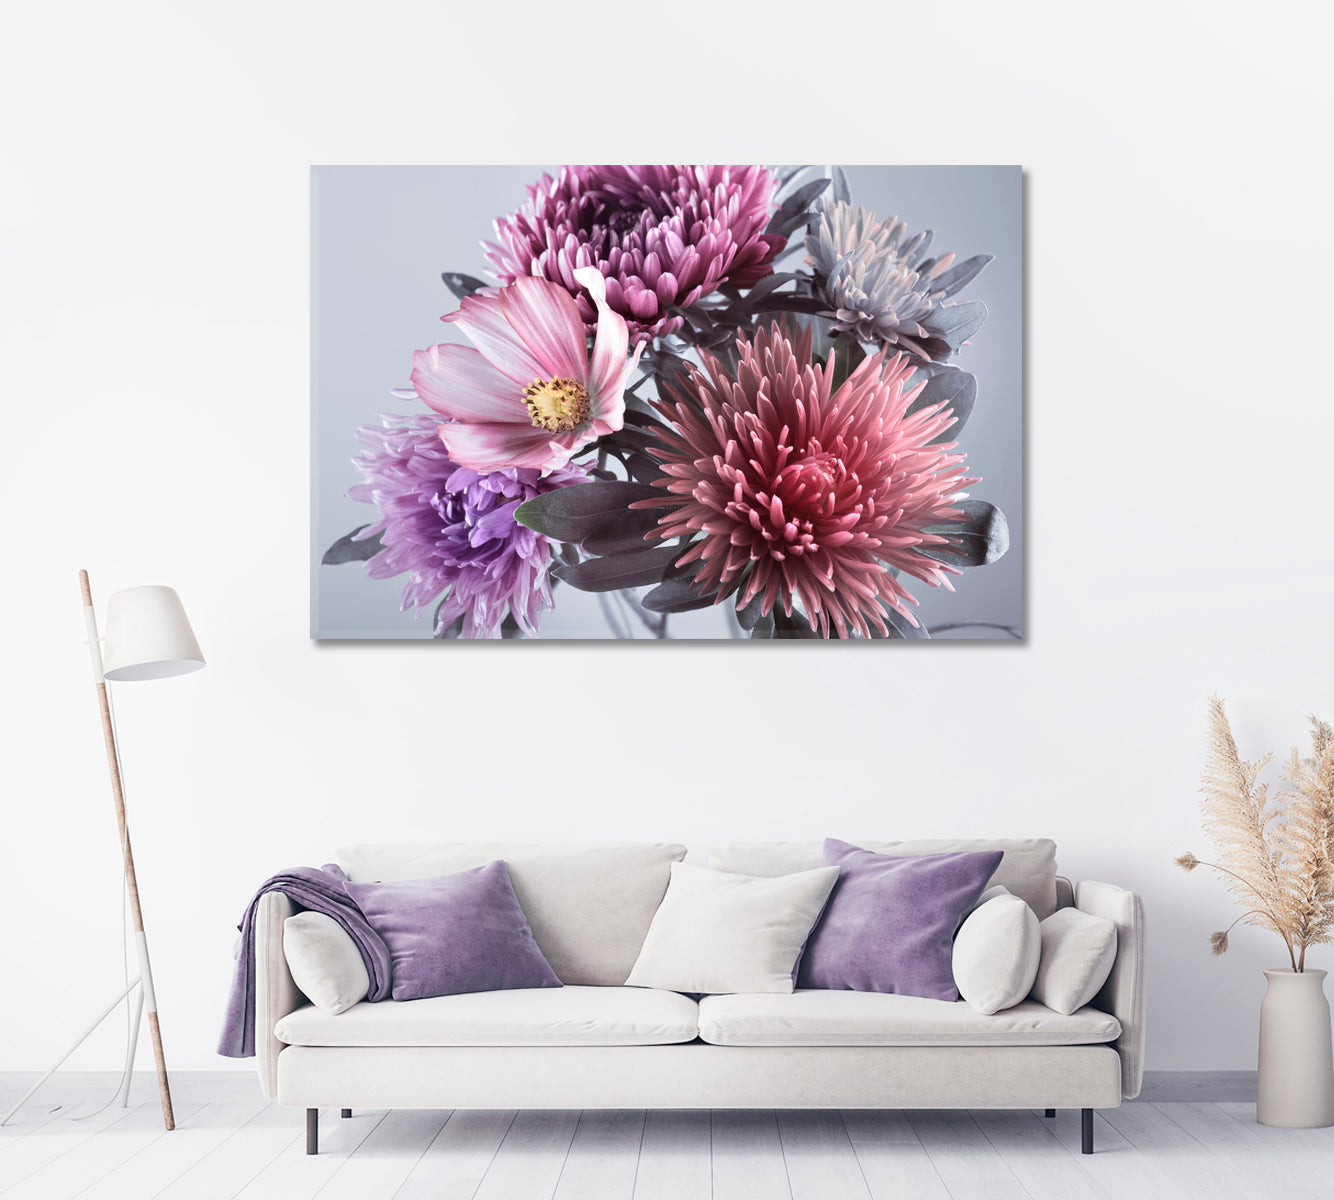 Purple Asters Flowers Art For Home-Canvas Print-CetArt-1 Panel-24x16 inches-CetArt